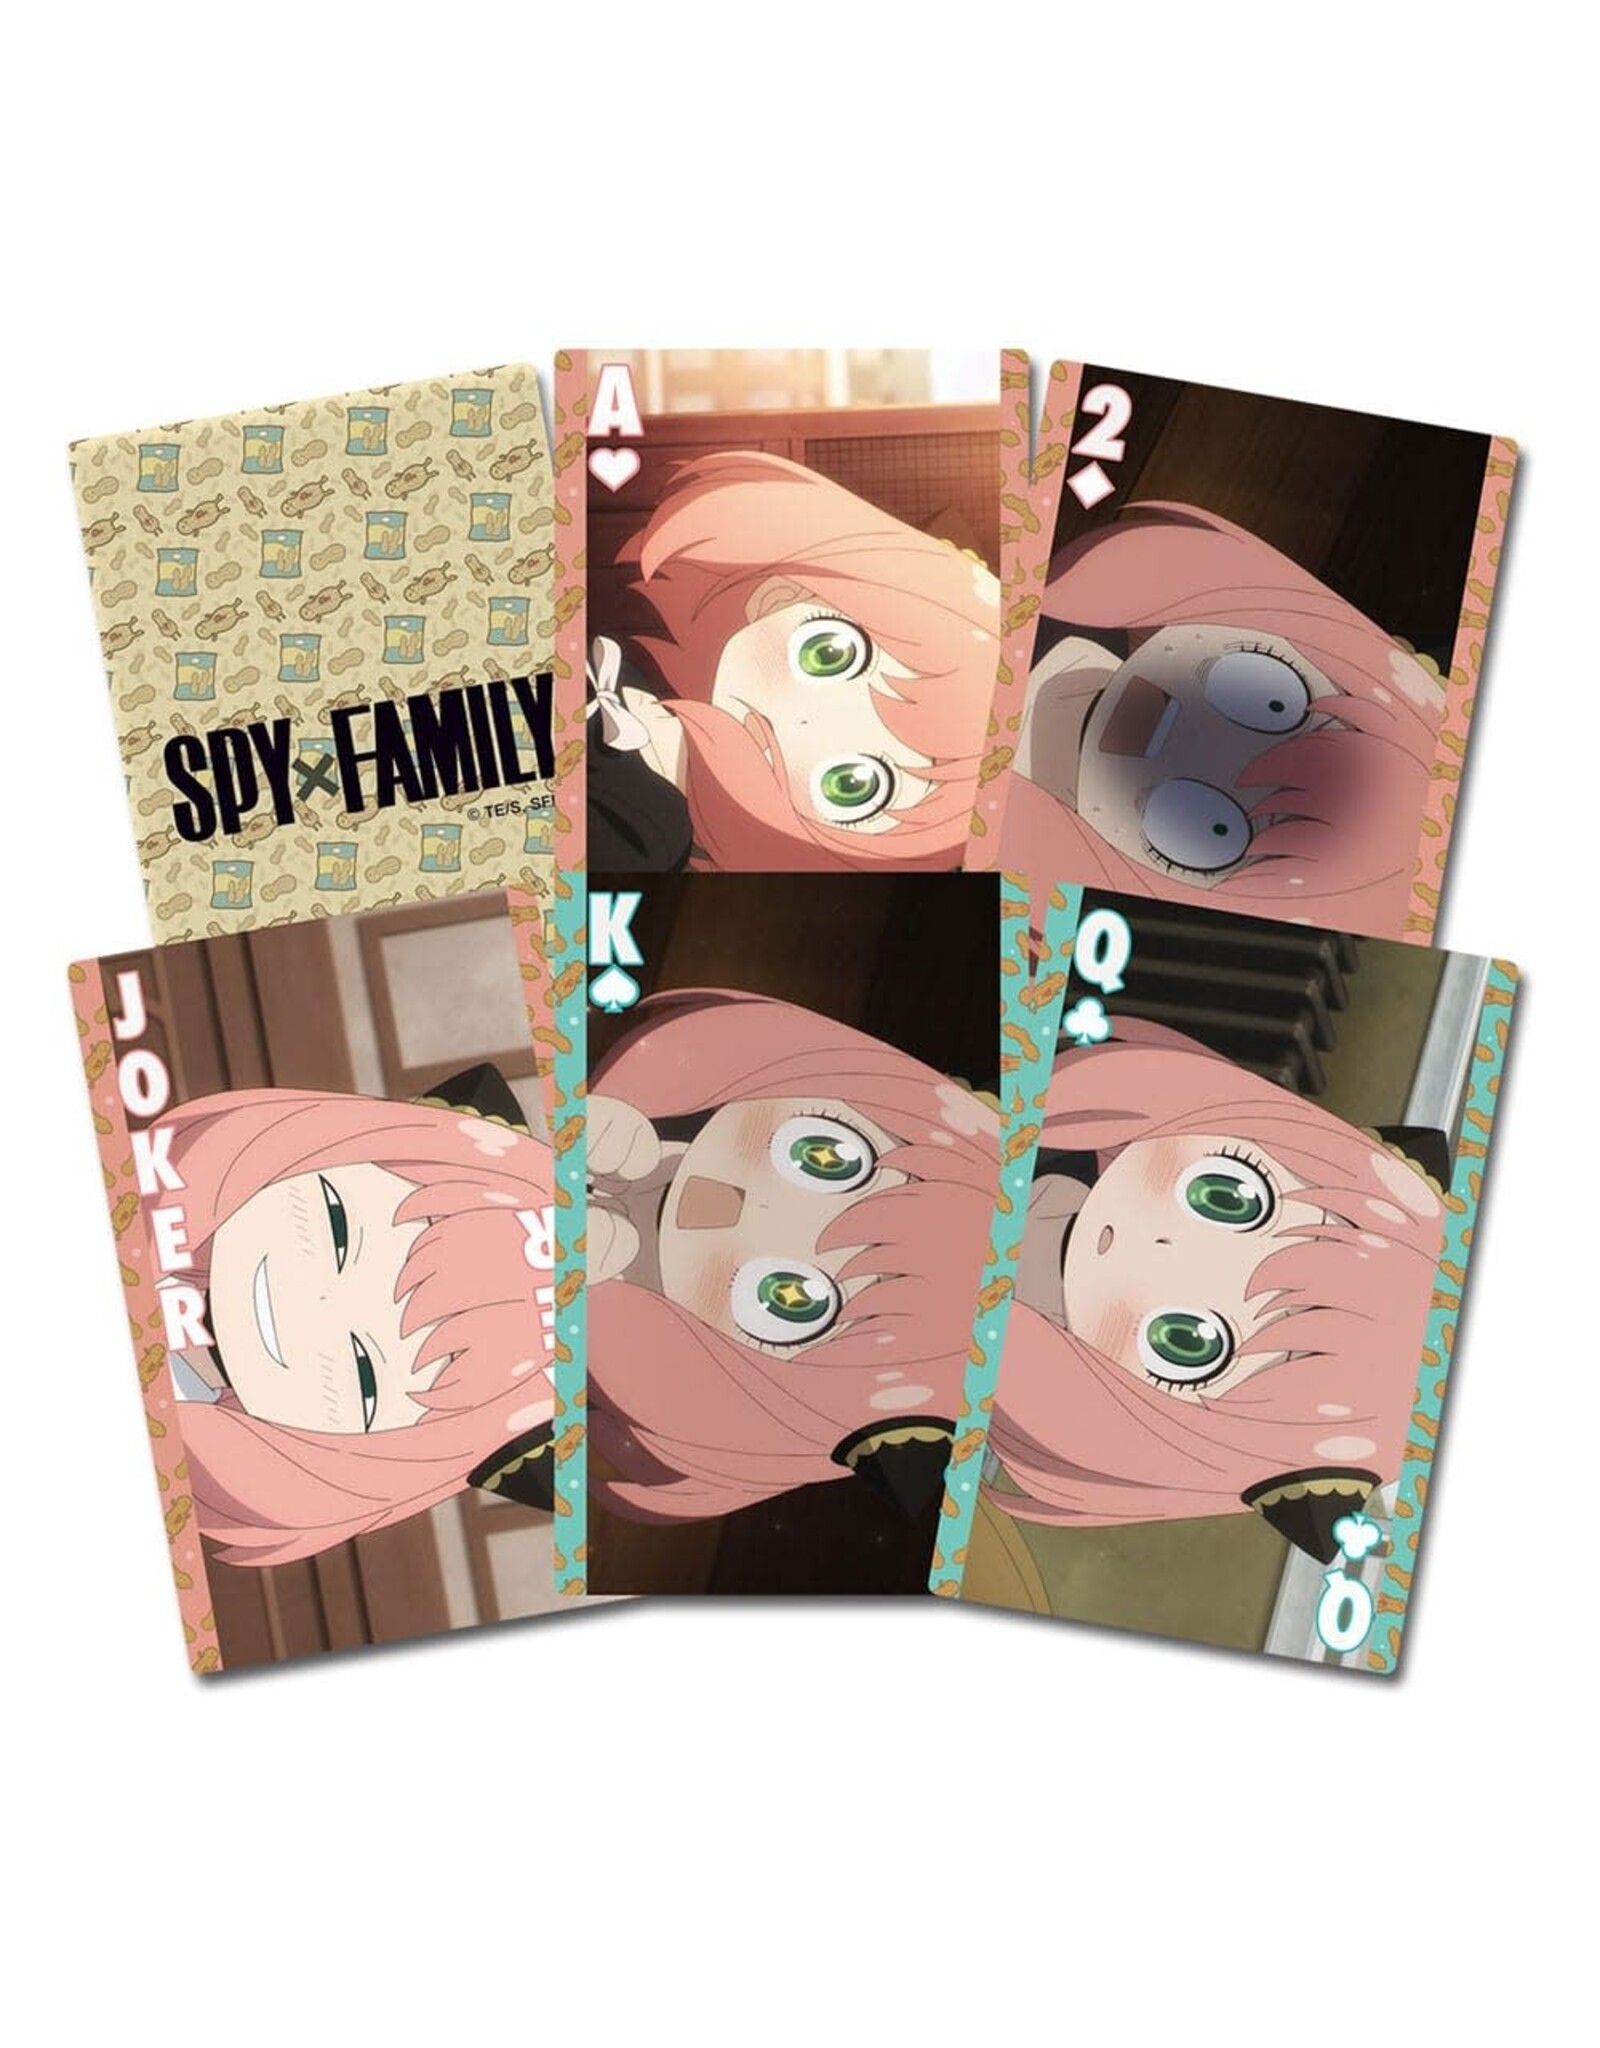 Spy x Family - Anya Facial Expressions Playing Cards